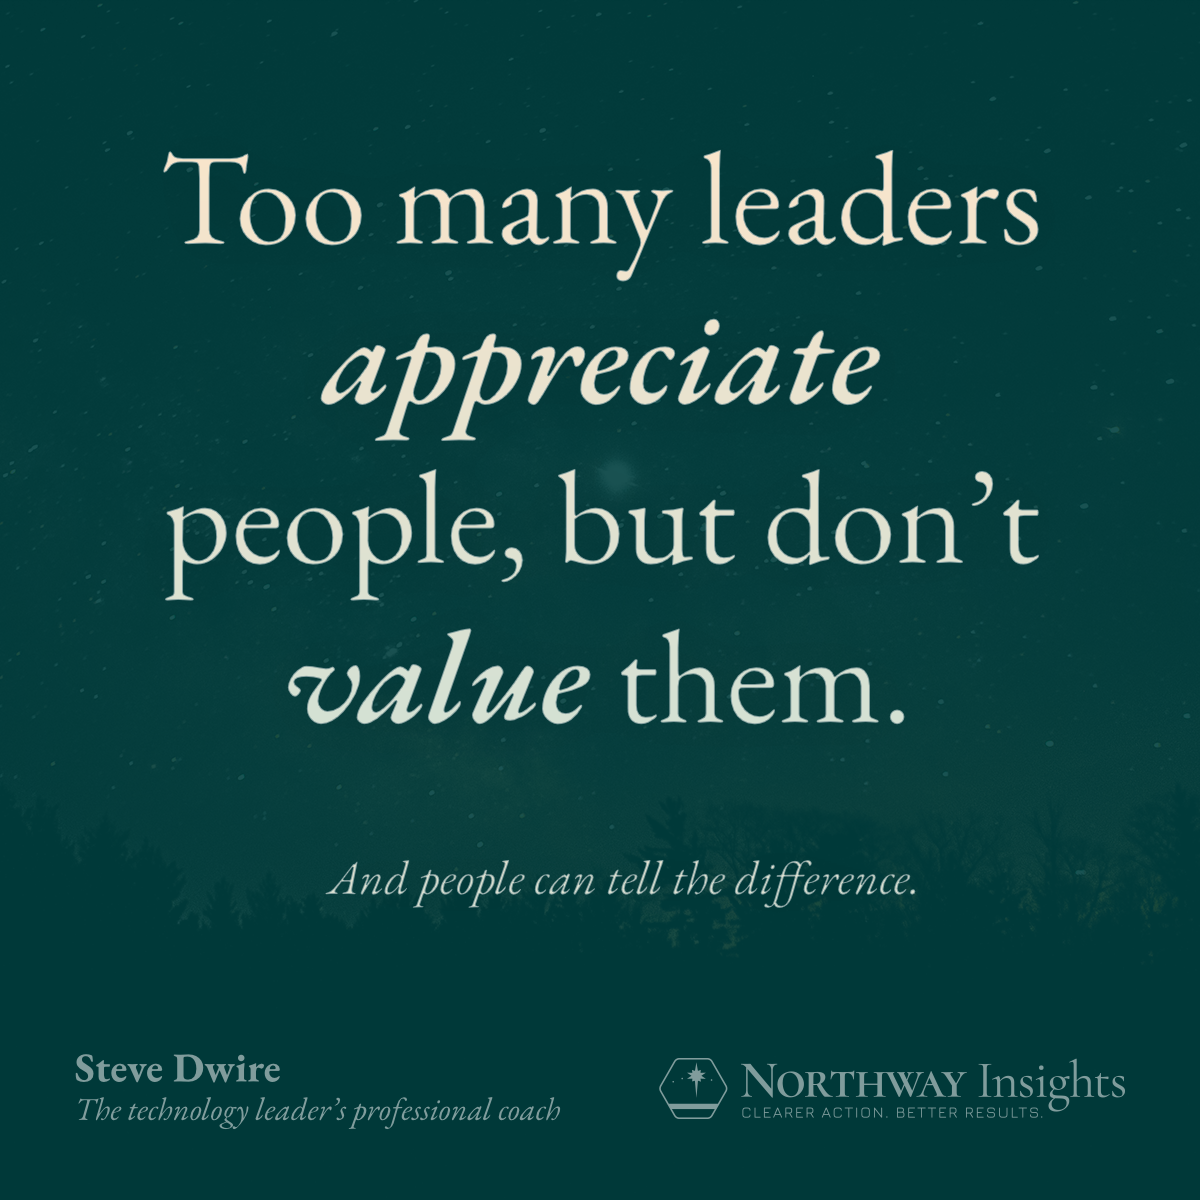 Too many leaders appreciate people, but don't value them. And people can tell the difference.